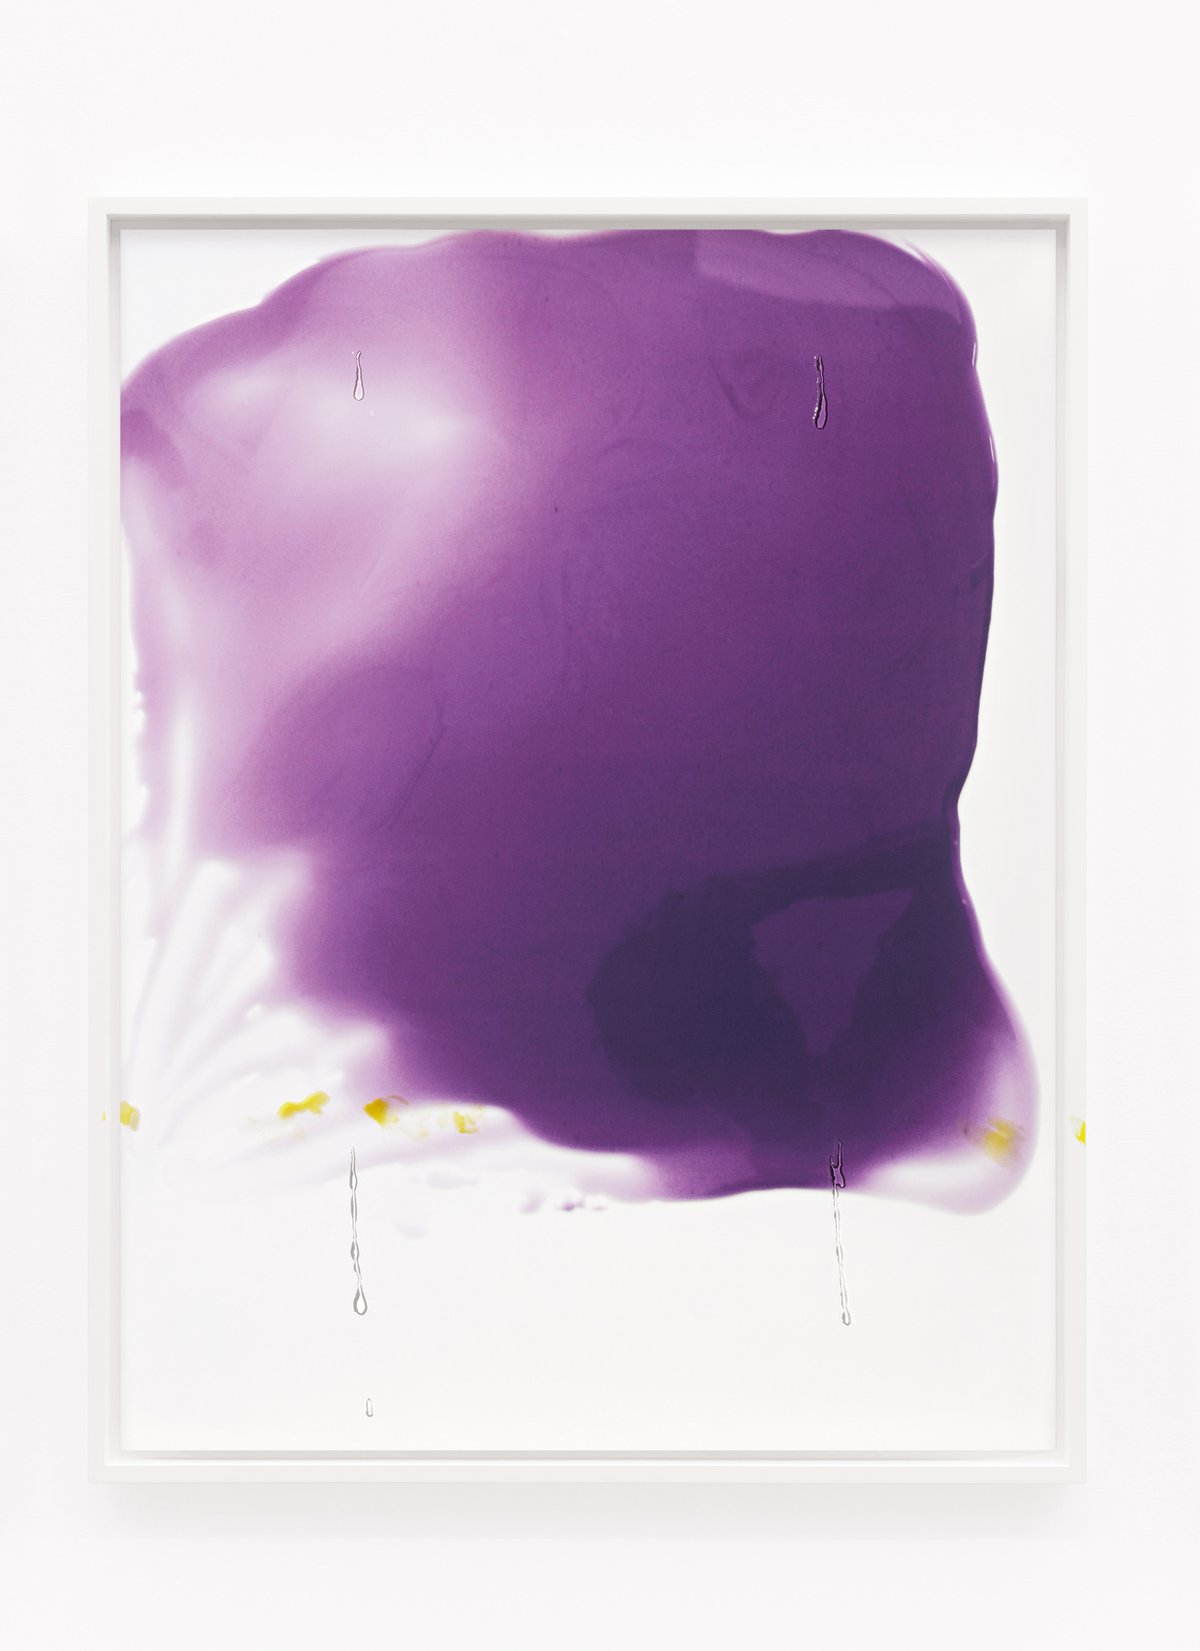 Lisa HolzerThe Party Sequel (Paris), 2017Pigment print on cotton paper, crystal clear 202/1 polyurethane and acrylic paint on glass110.3 × 86.3 cm